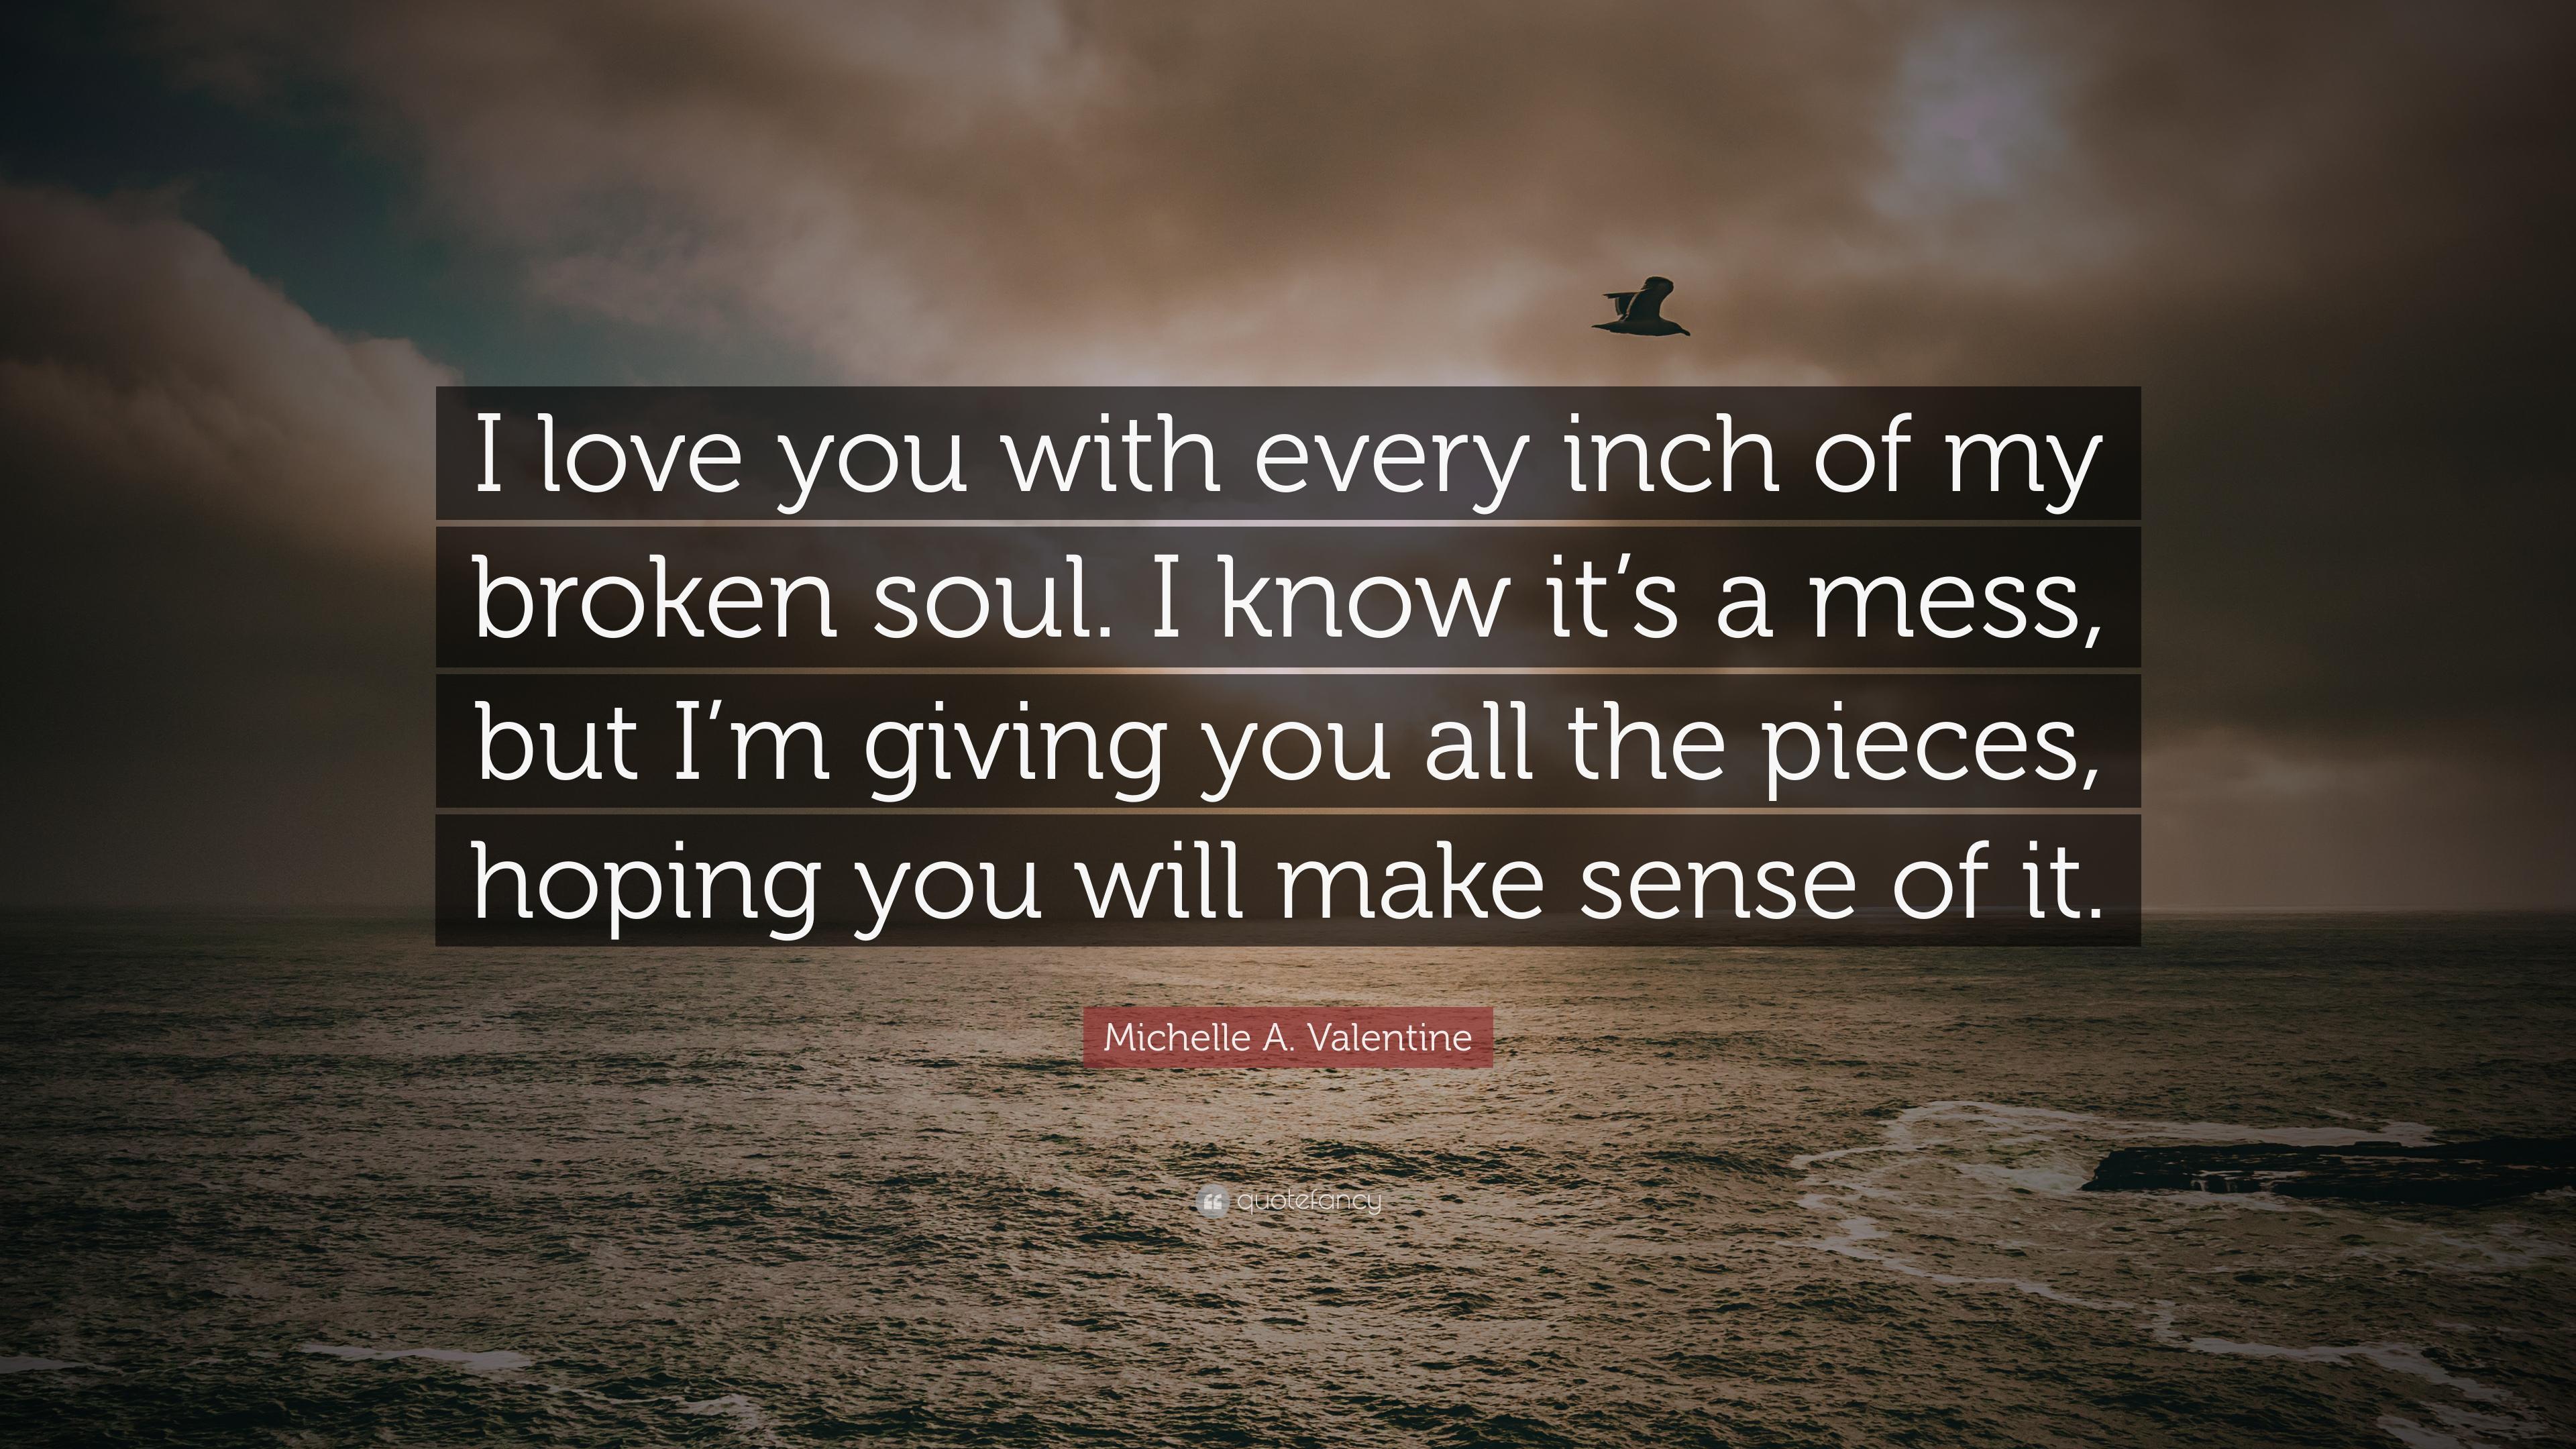 Michelle A. Valentine Quote: "I love you with every inch of my.